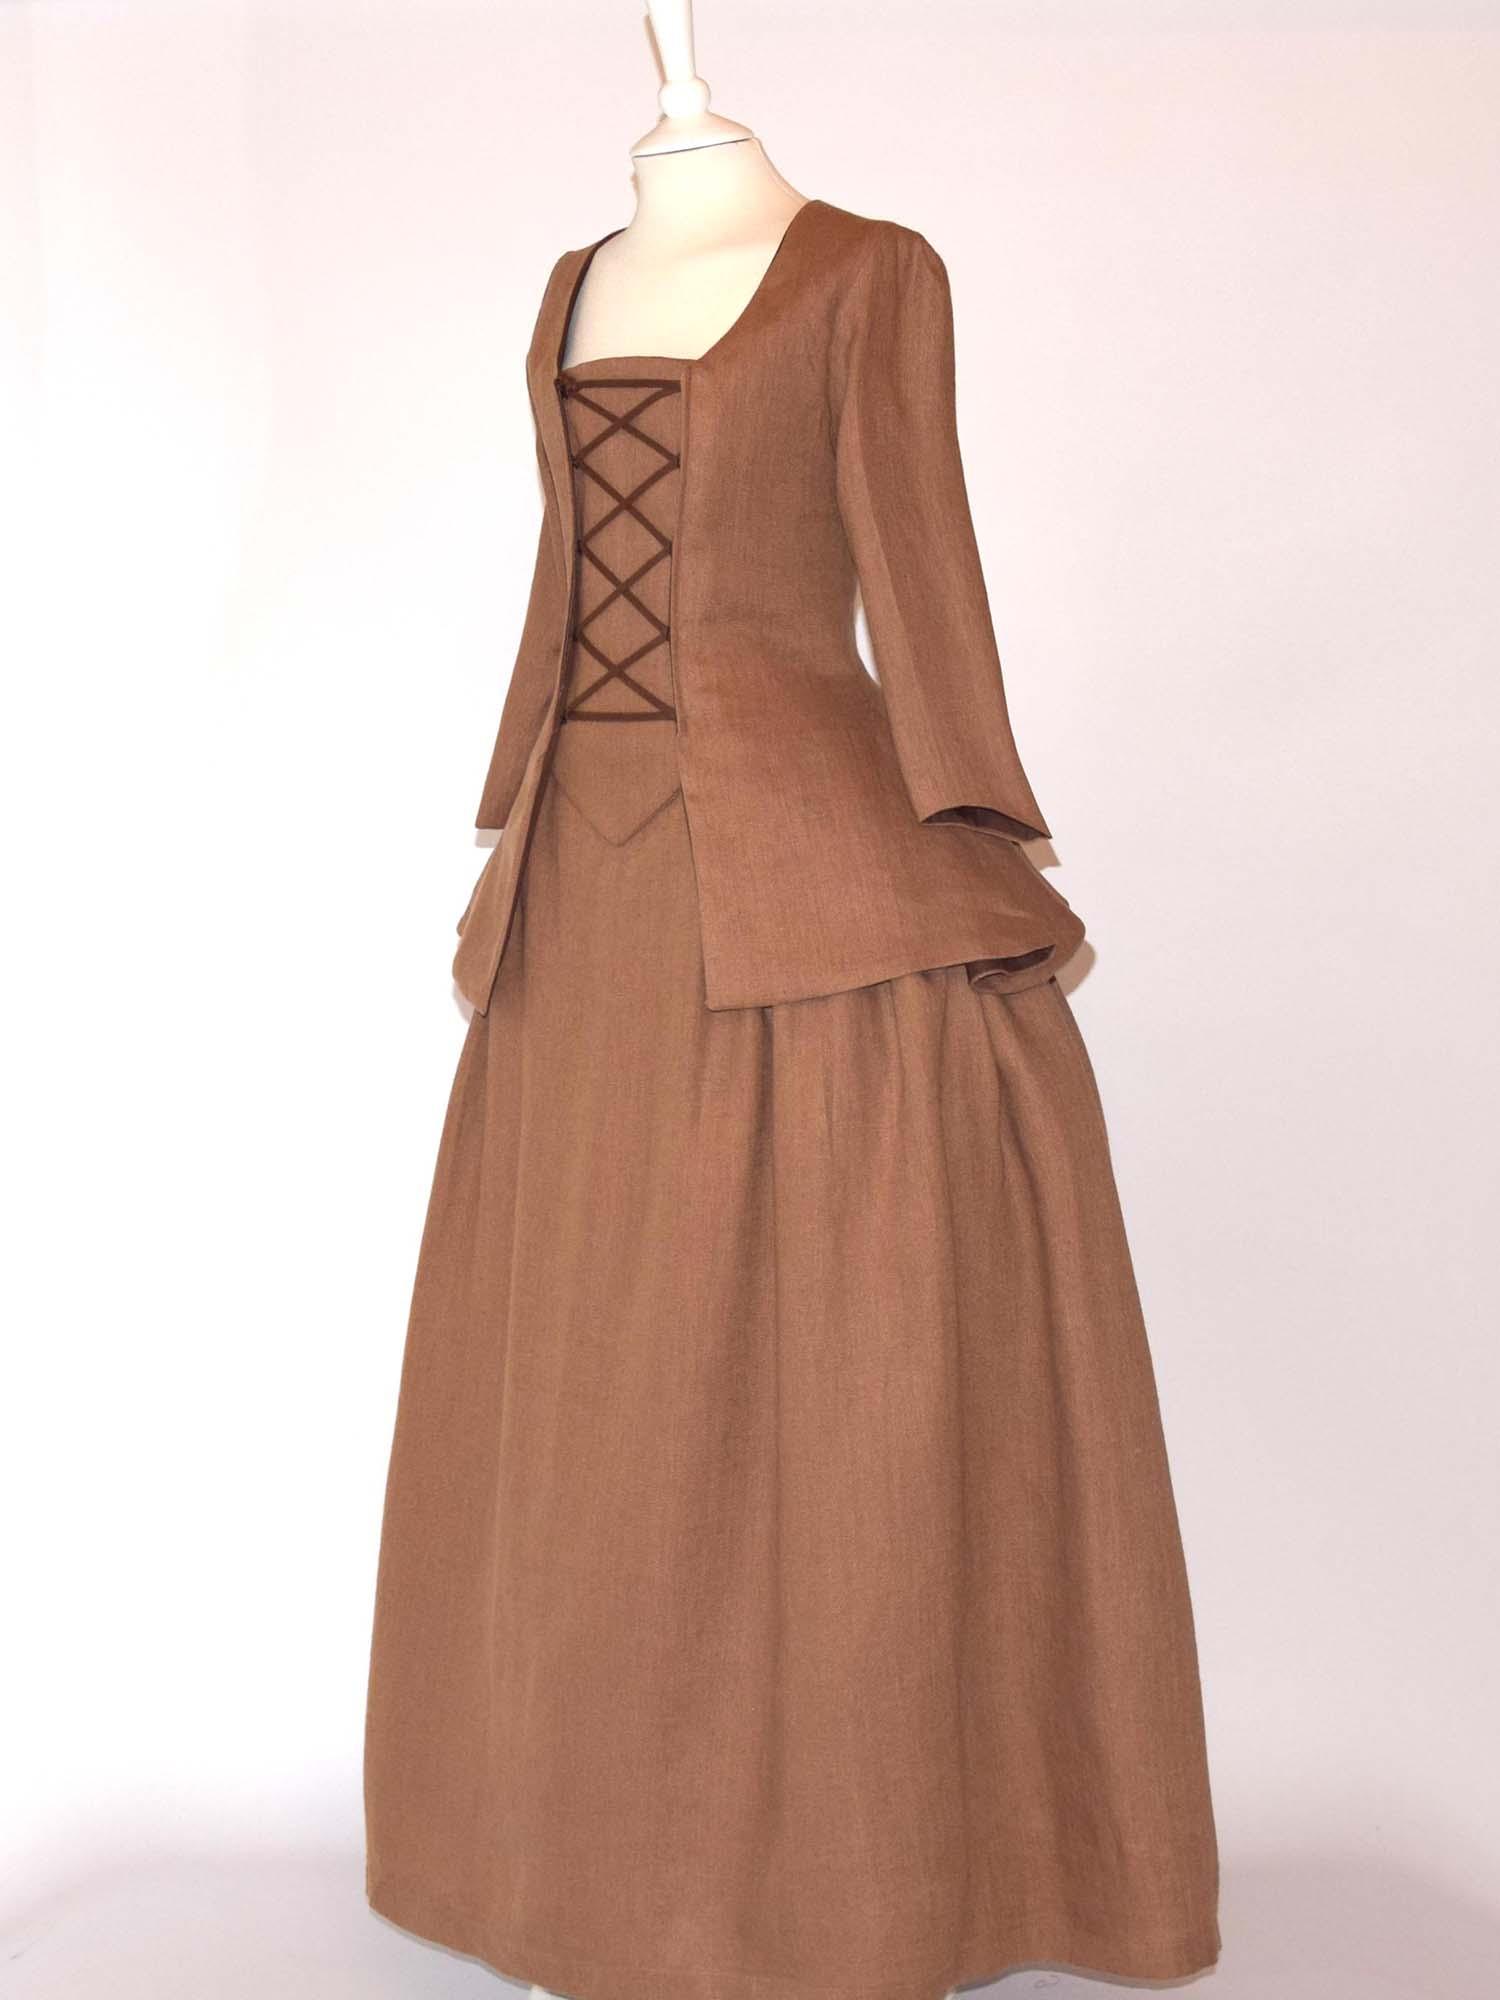 JANET, Colonial Costume in Toffee Linen - Atelier Serraspina